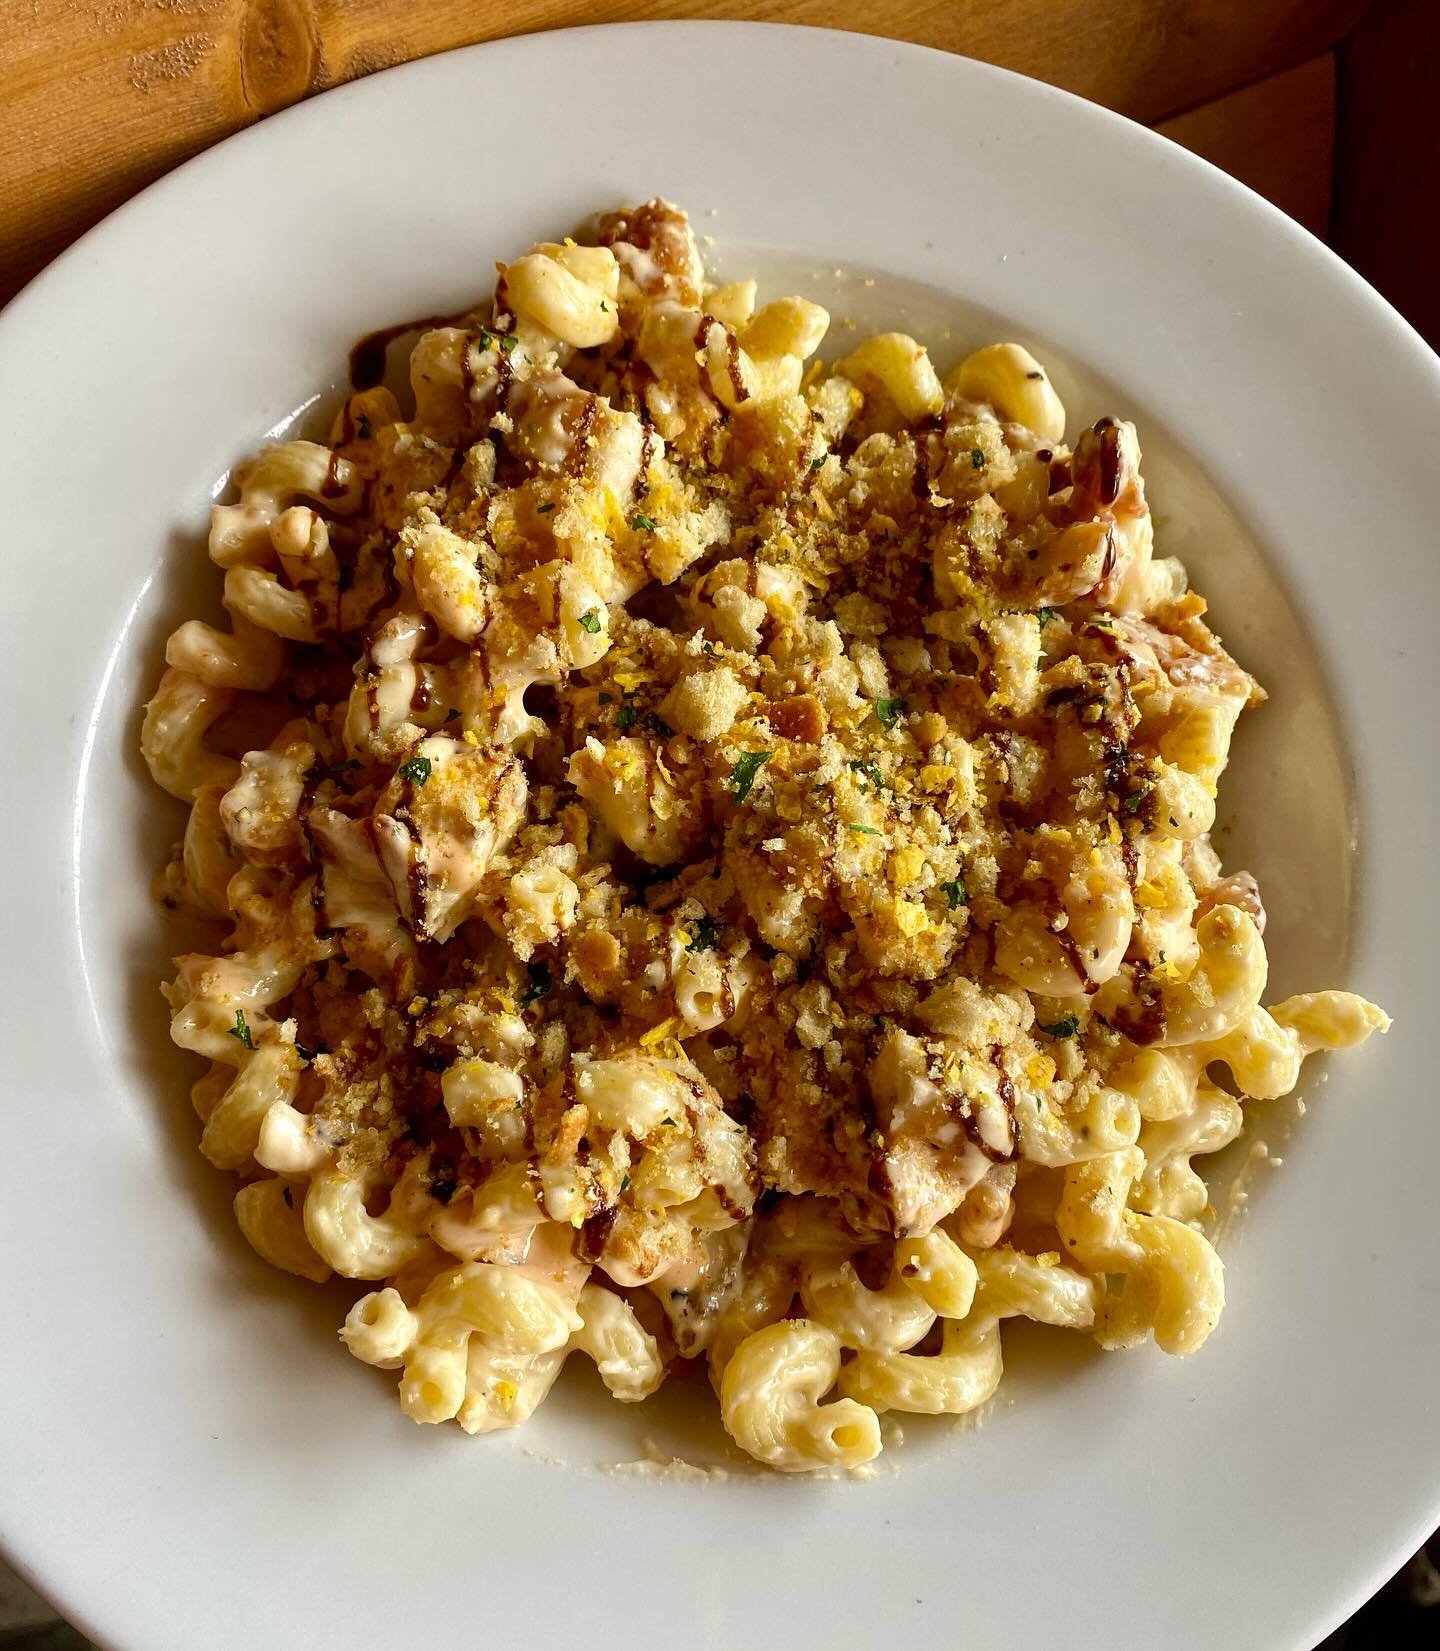 Denver on Kipling Kitchen Special - Chicken Bacon Ranch Mac! Cavatappi pasta in Alaskan Amber beer cheese sauce with fried chicken, bacon, balsamic glaze, buffalo ranch drizzle, &amp; cool ranch Dorito crunch!